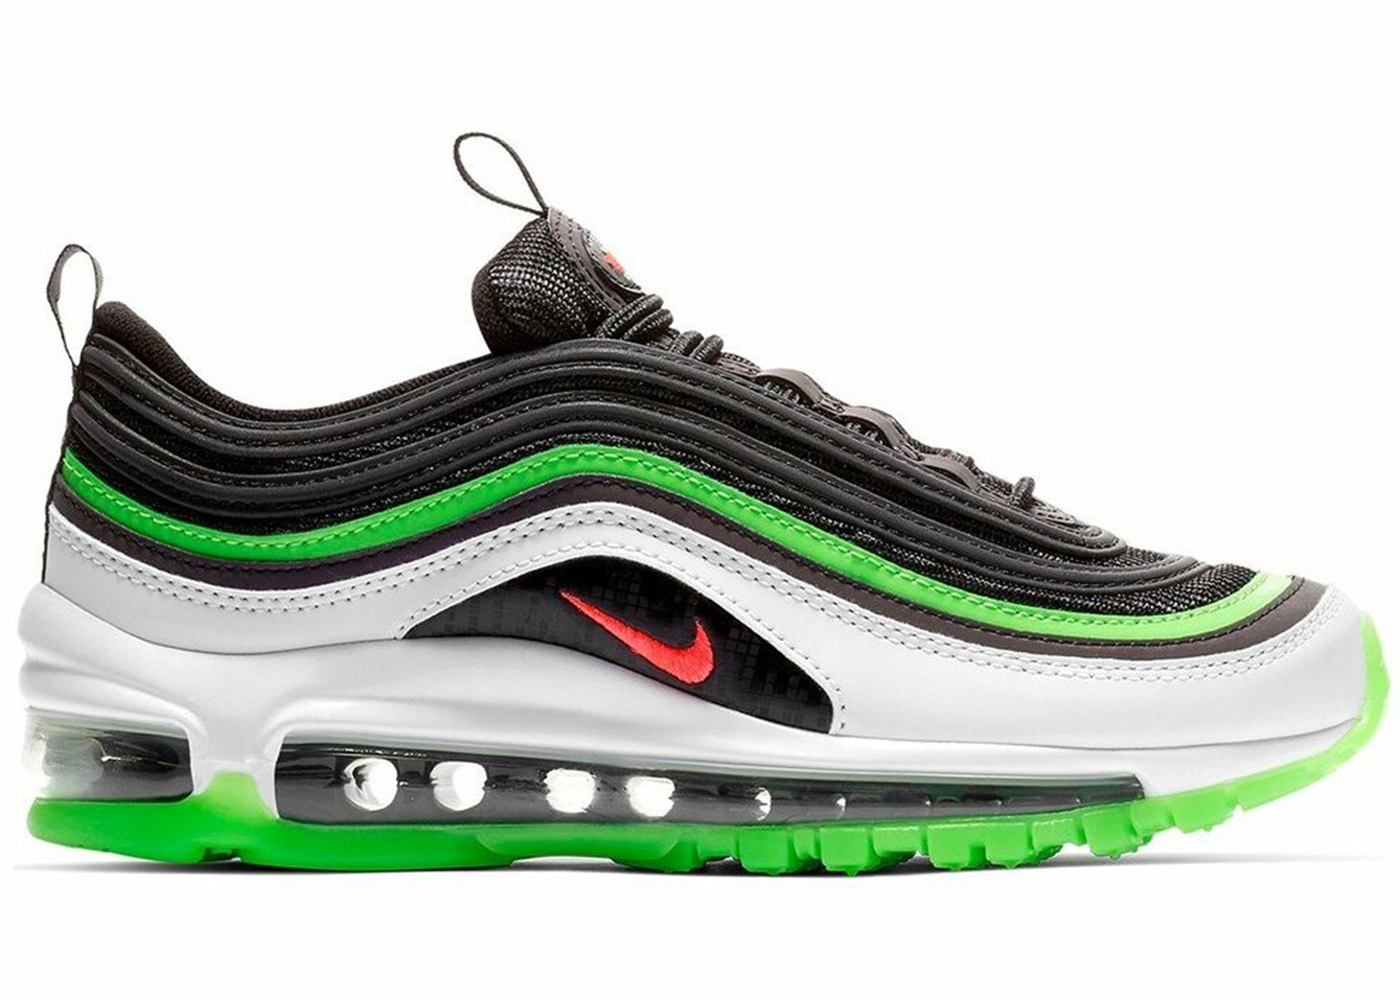 white and lime green air max 97